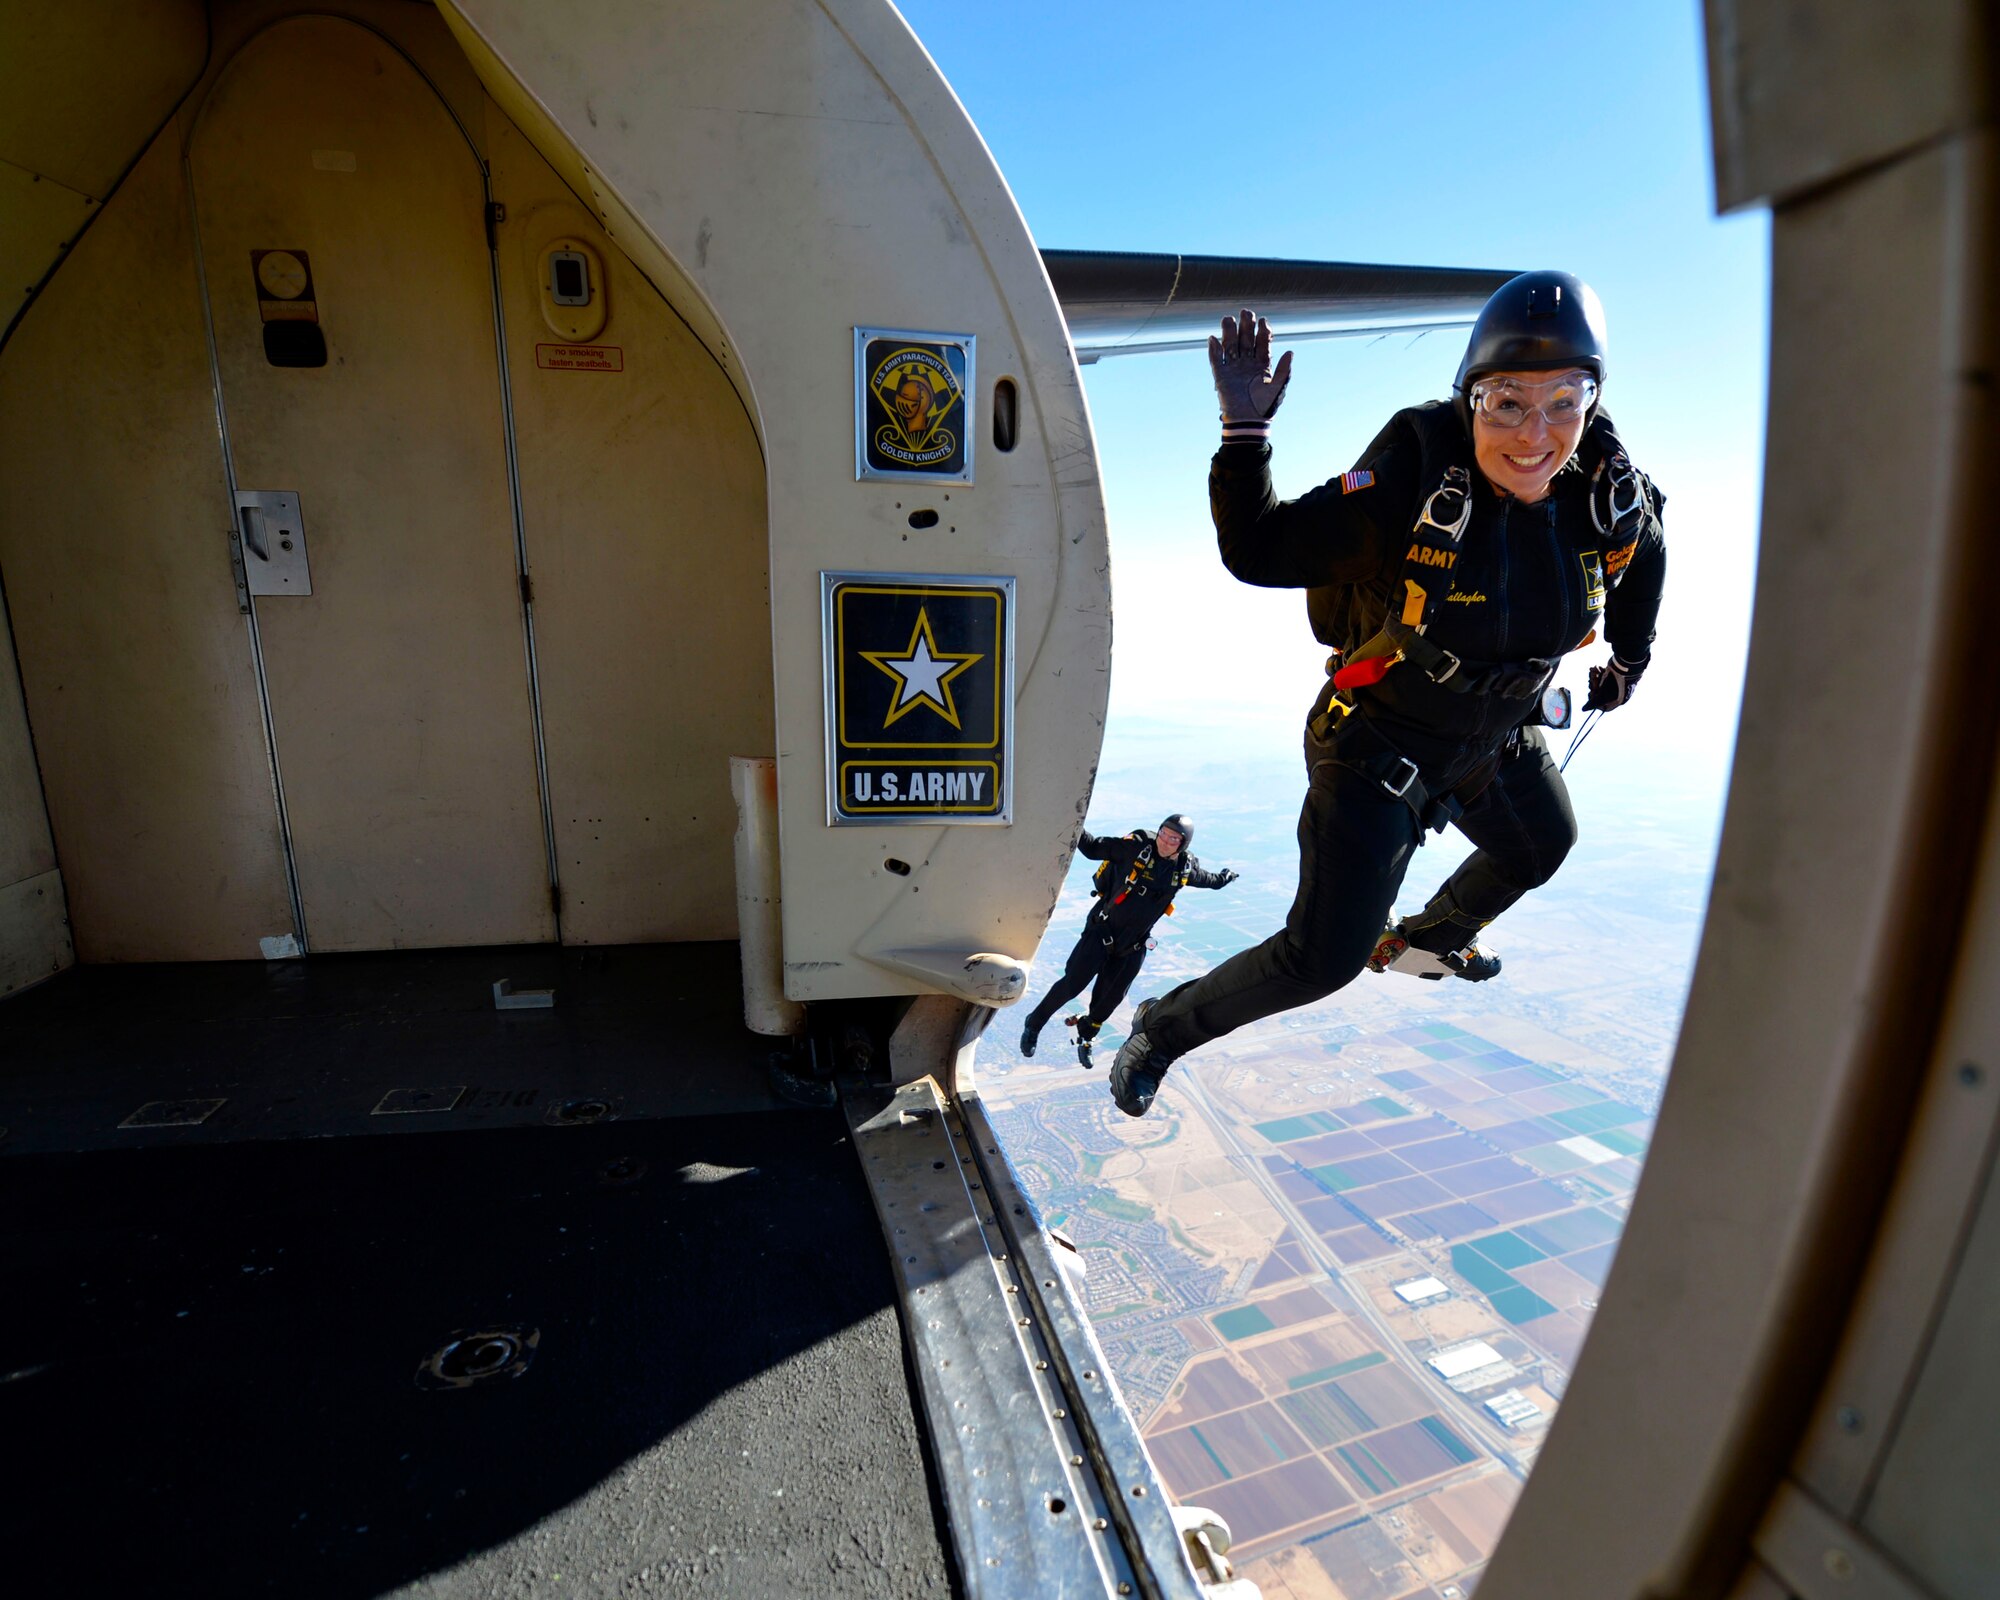 Army Staff Sgt. Sherri Jo Gallagher, a member of the U.S. Army's Golden Knights waves as she exits the plane during the Luke Air Force Base air show, 75 Years of Airpower Apr. 1, 2016.   (U.S. Air Force photo by Senior Airman James Hensley)